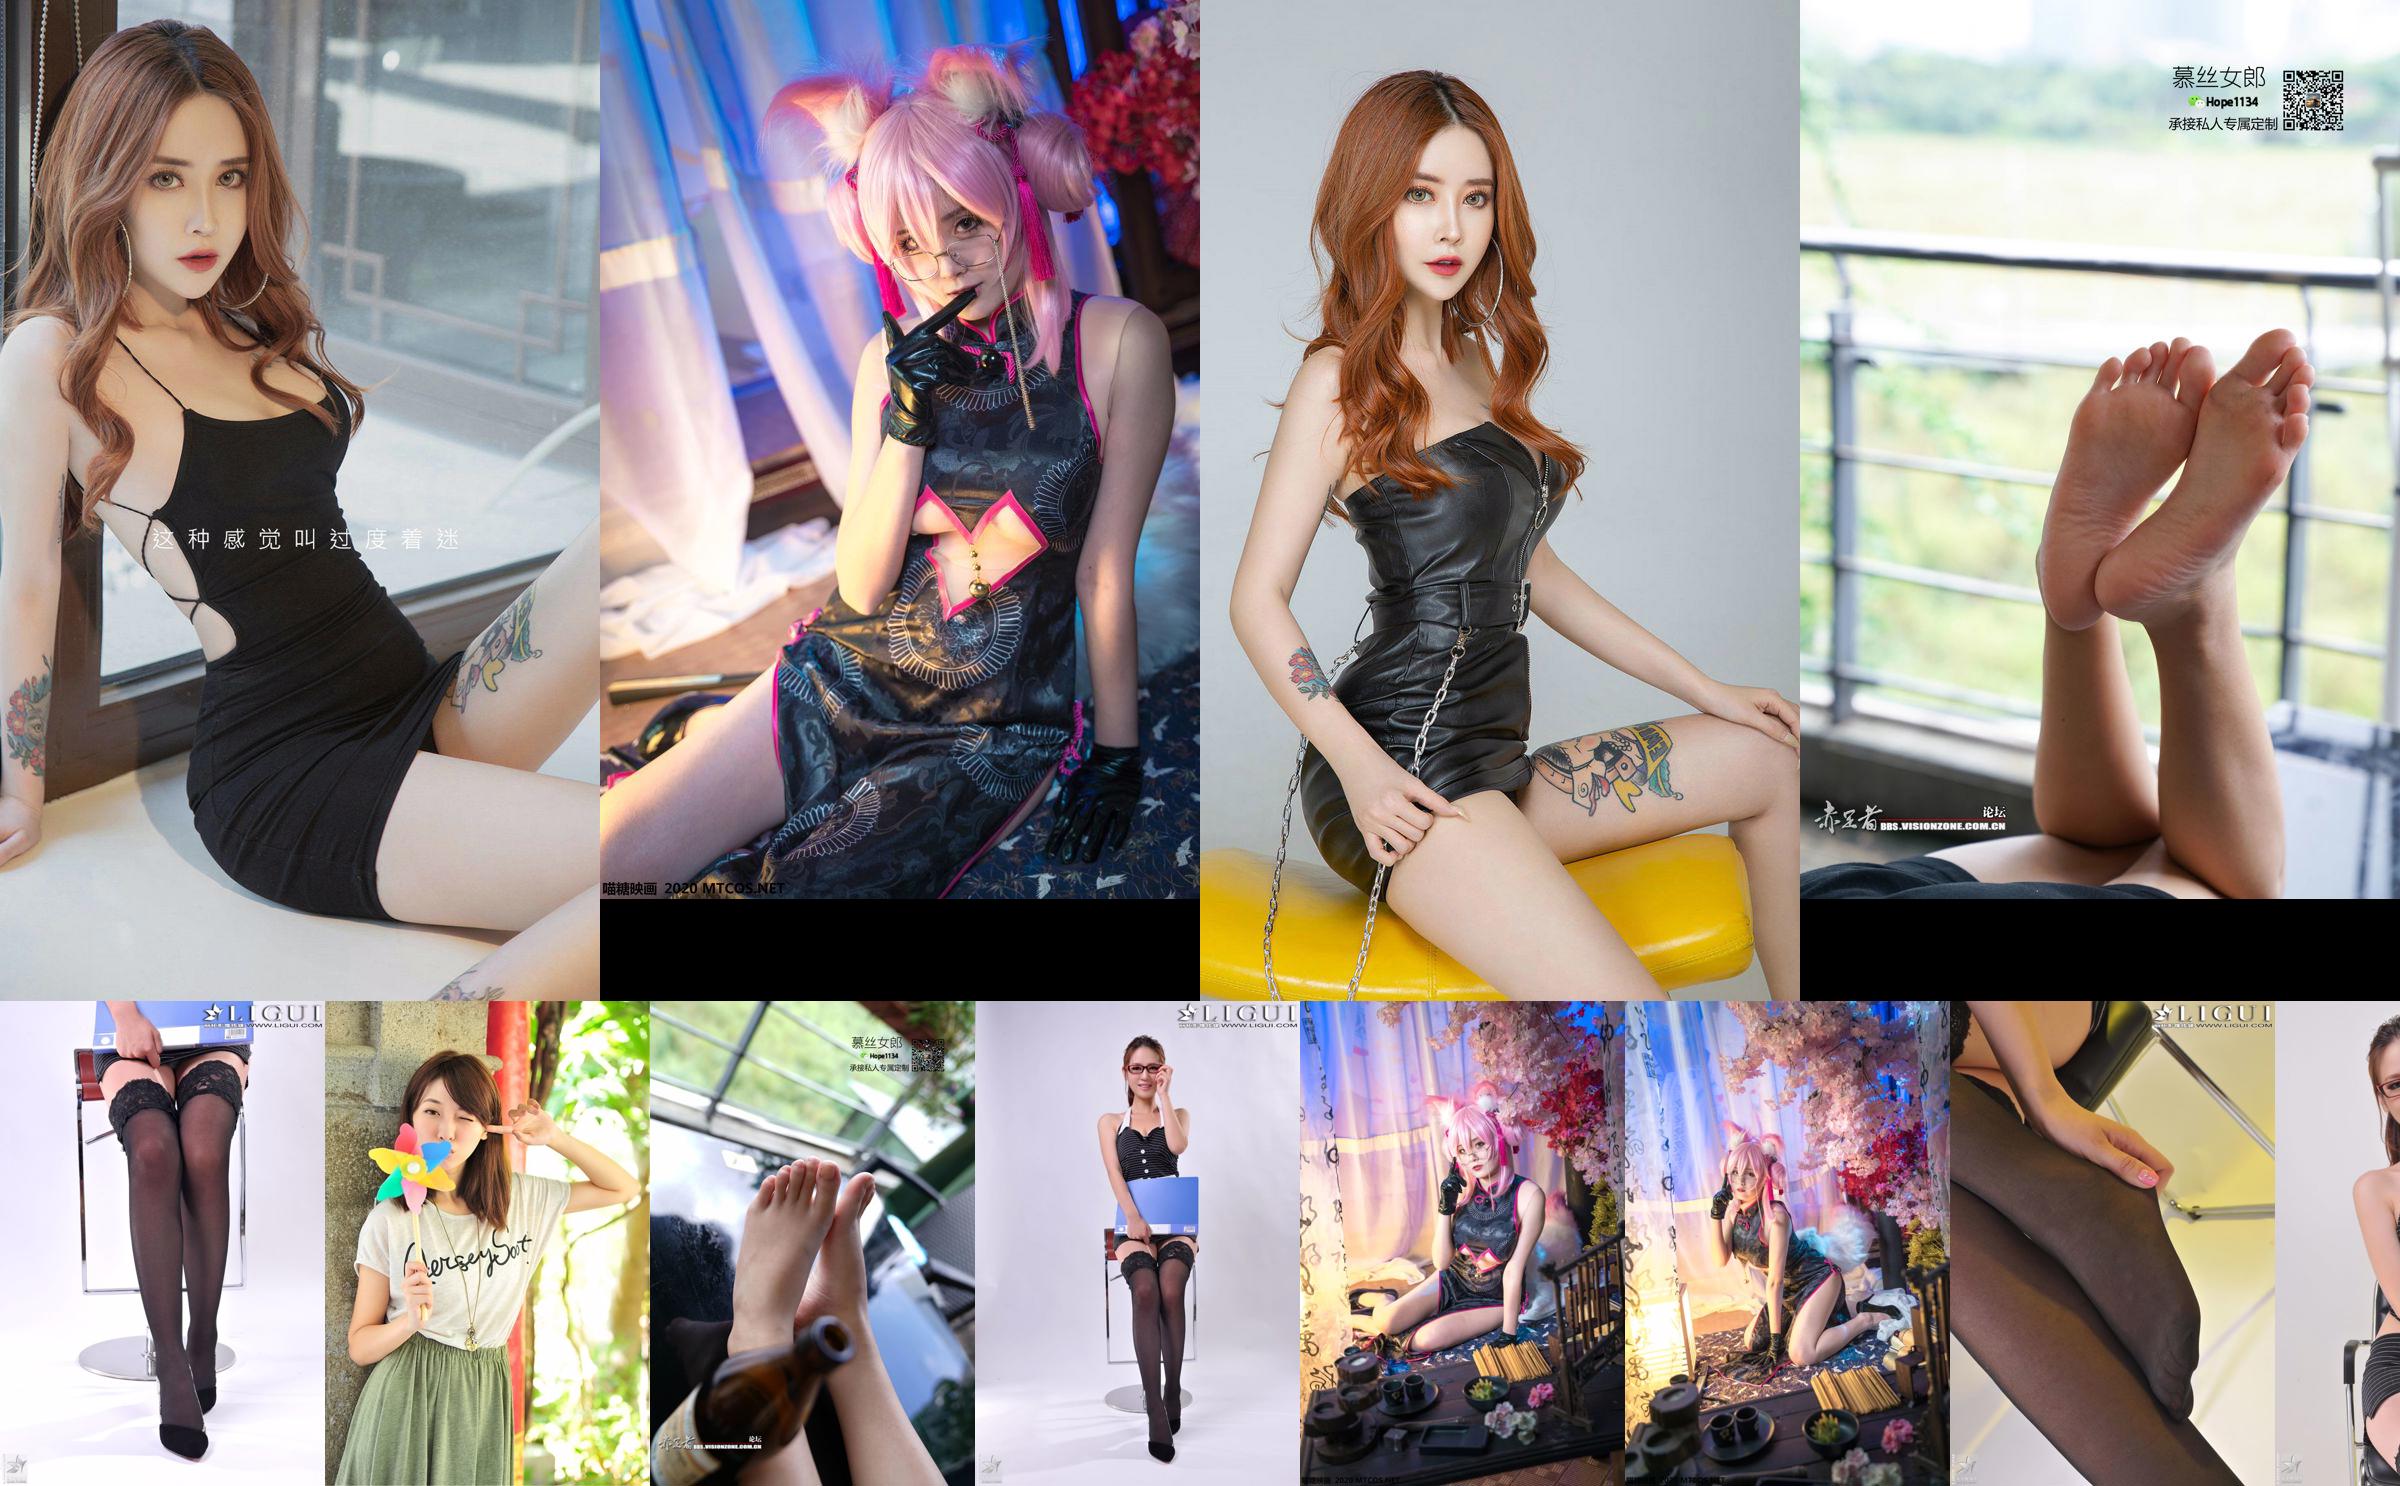 Model Xiaoyu "Excessively Fascinated" [Youguoquan Ai Youwu] No.1447 No.37bcea Page 1